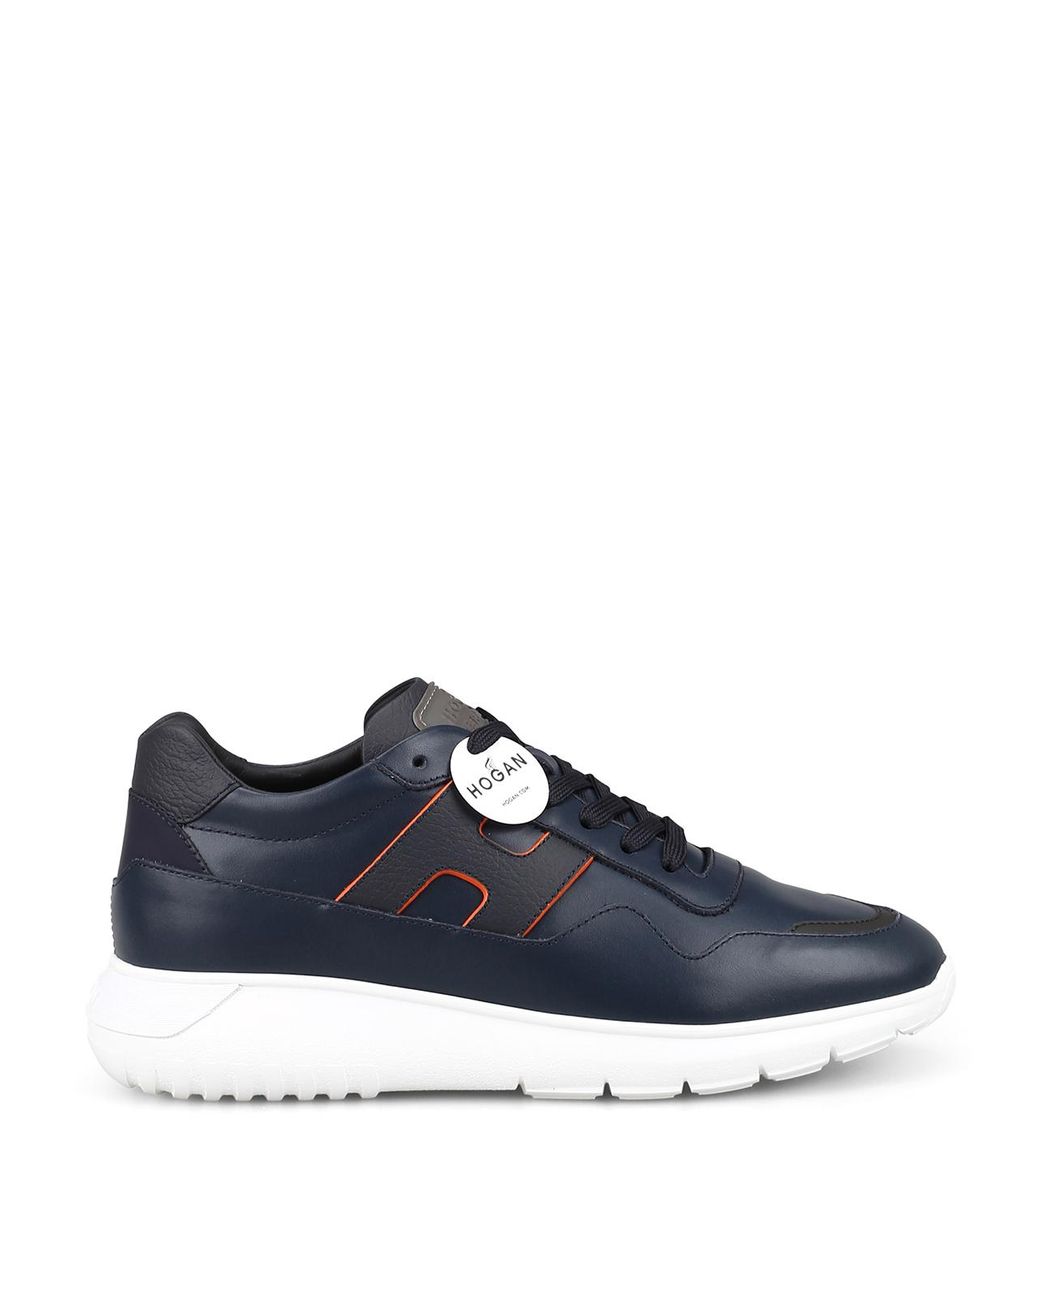 Hogan Interactive Blue Leather Sneakers for Men - Lyst